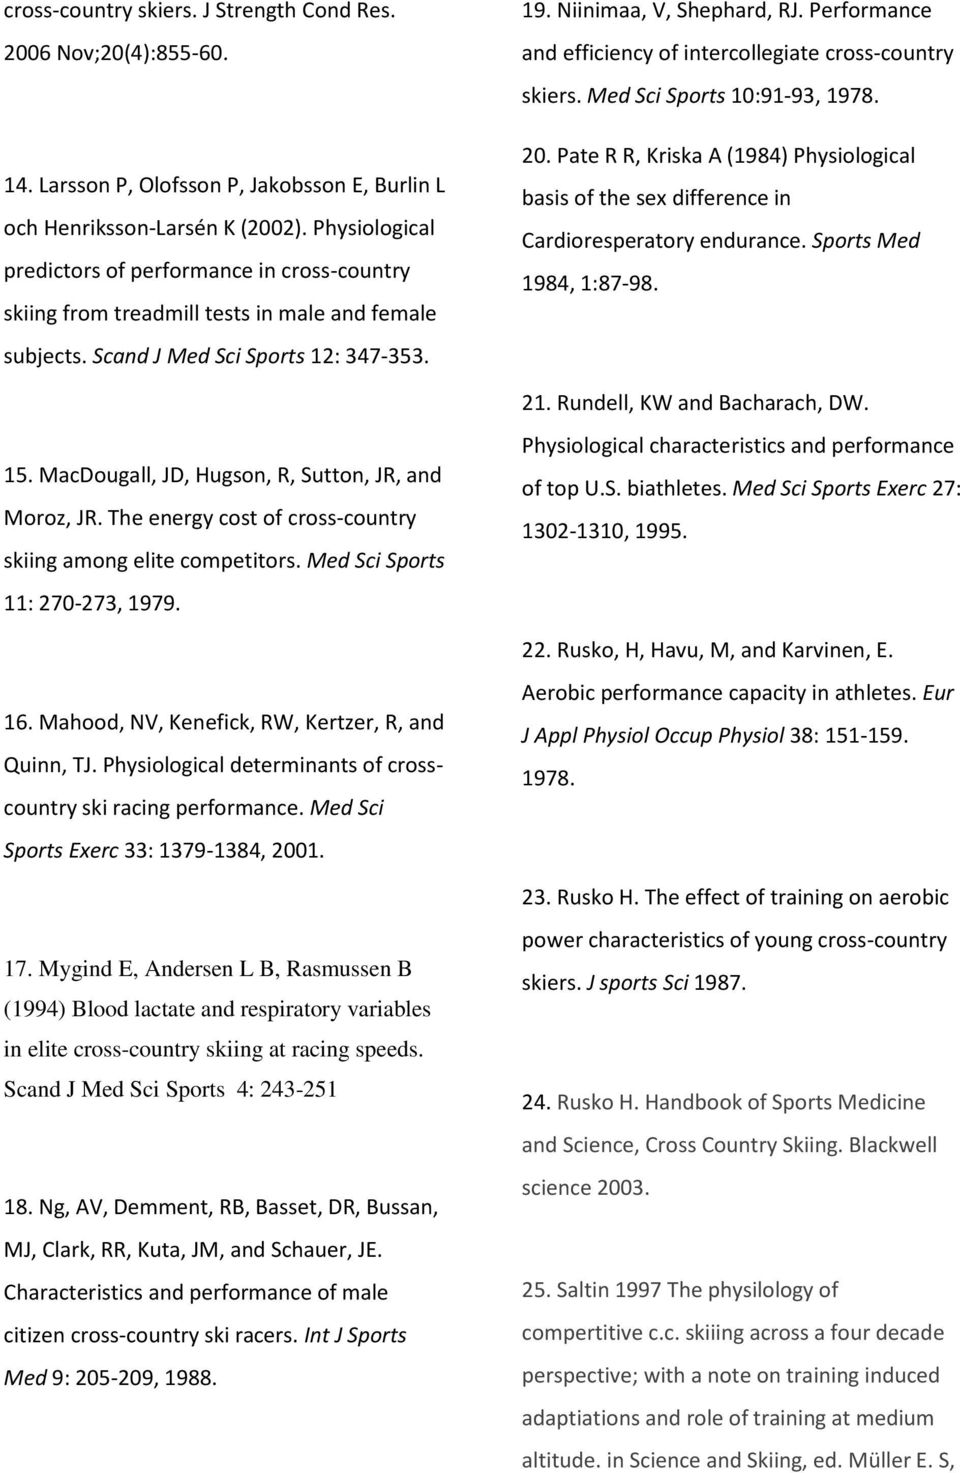 Performance and efficiency of intercollegiate cross-country skiers. Med Sci Sports 10:91-93, 1978. 20.